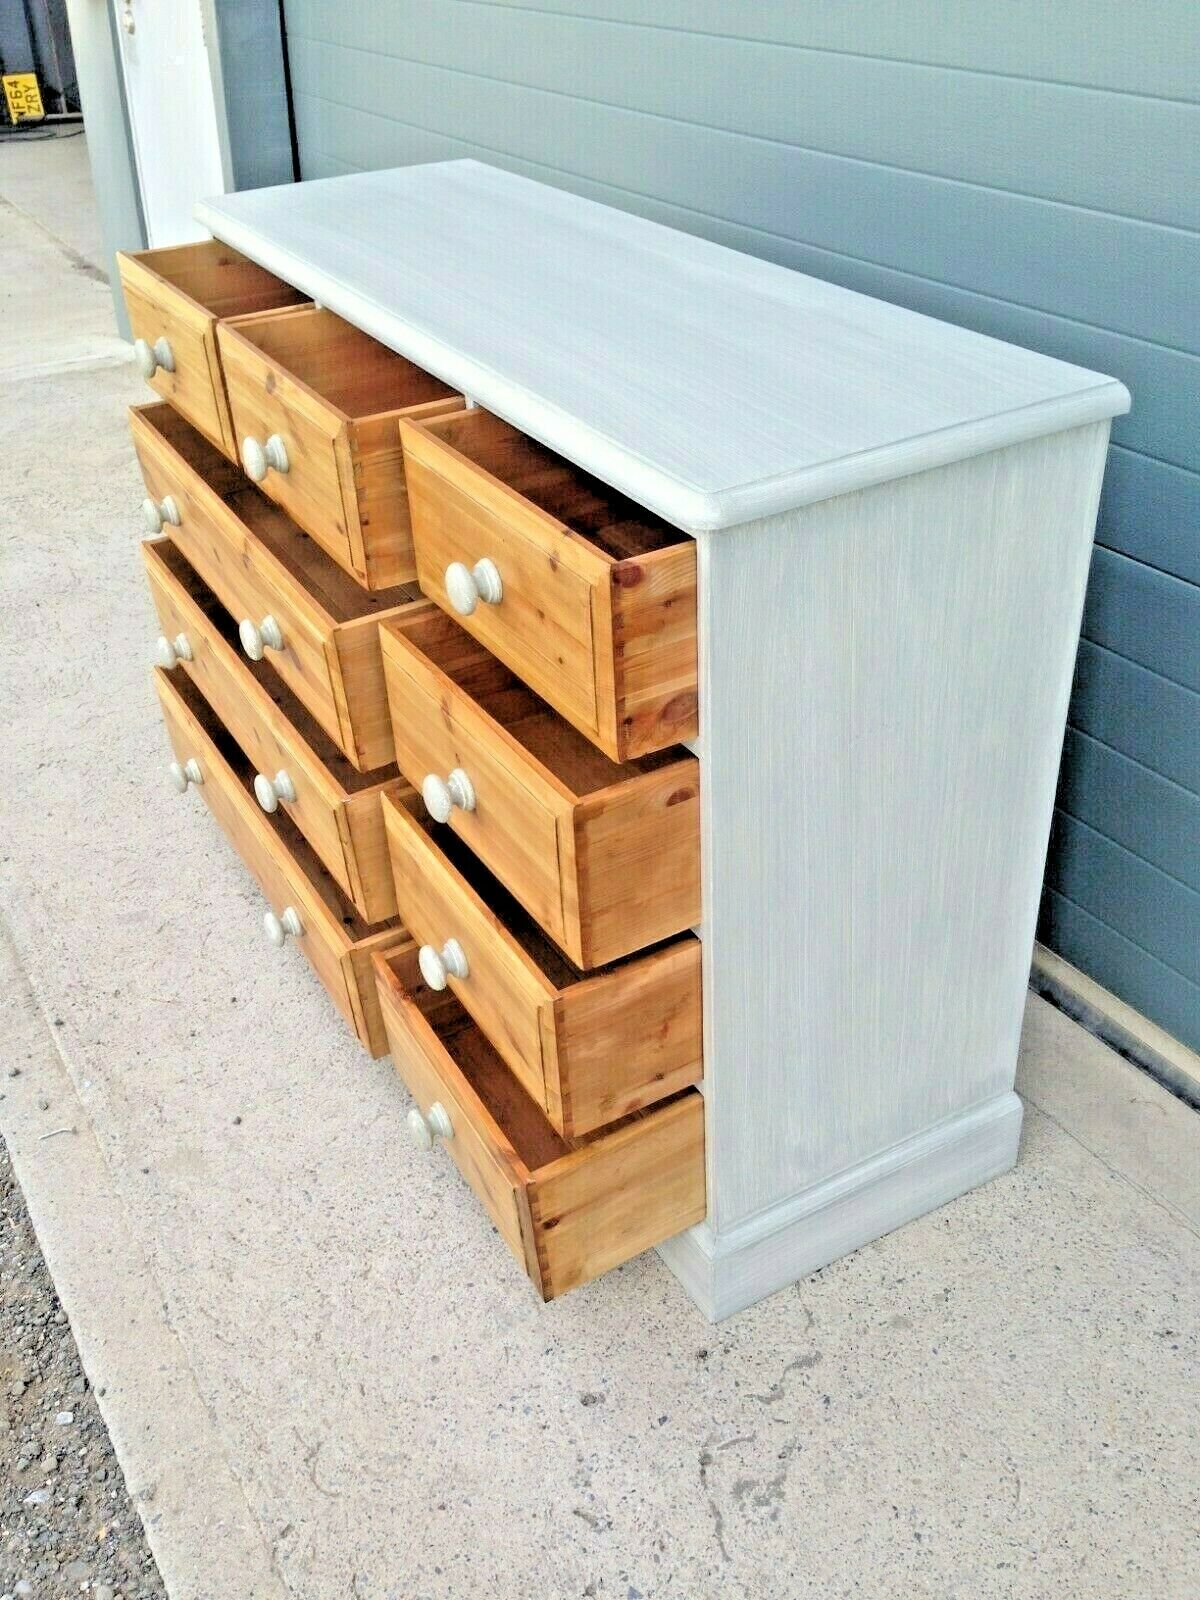 229.....Vintage Pine Chest / Rustic Pine Bank Of Drawers